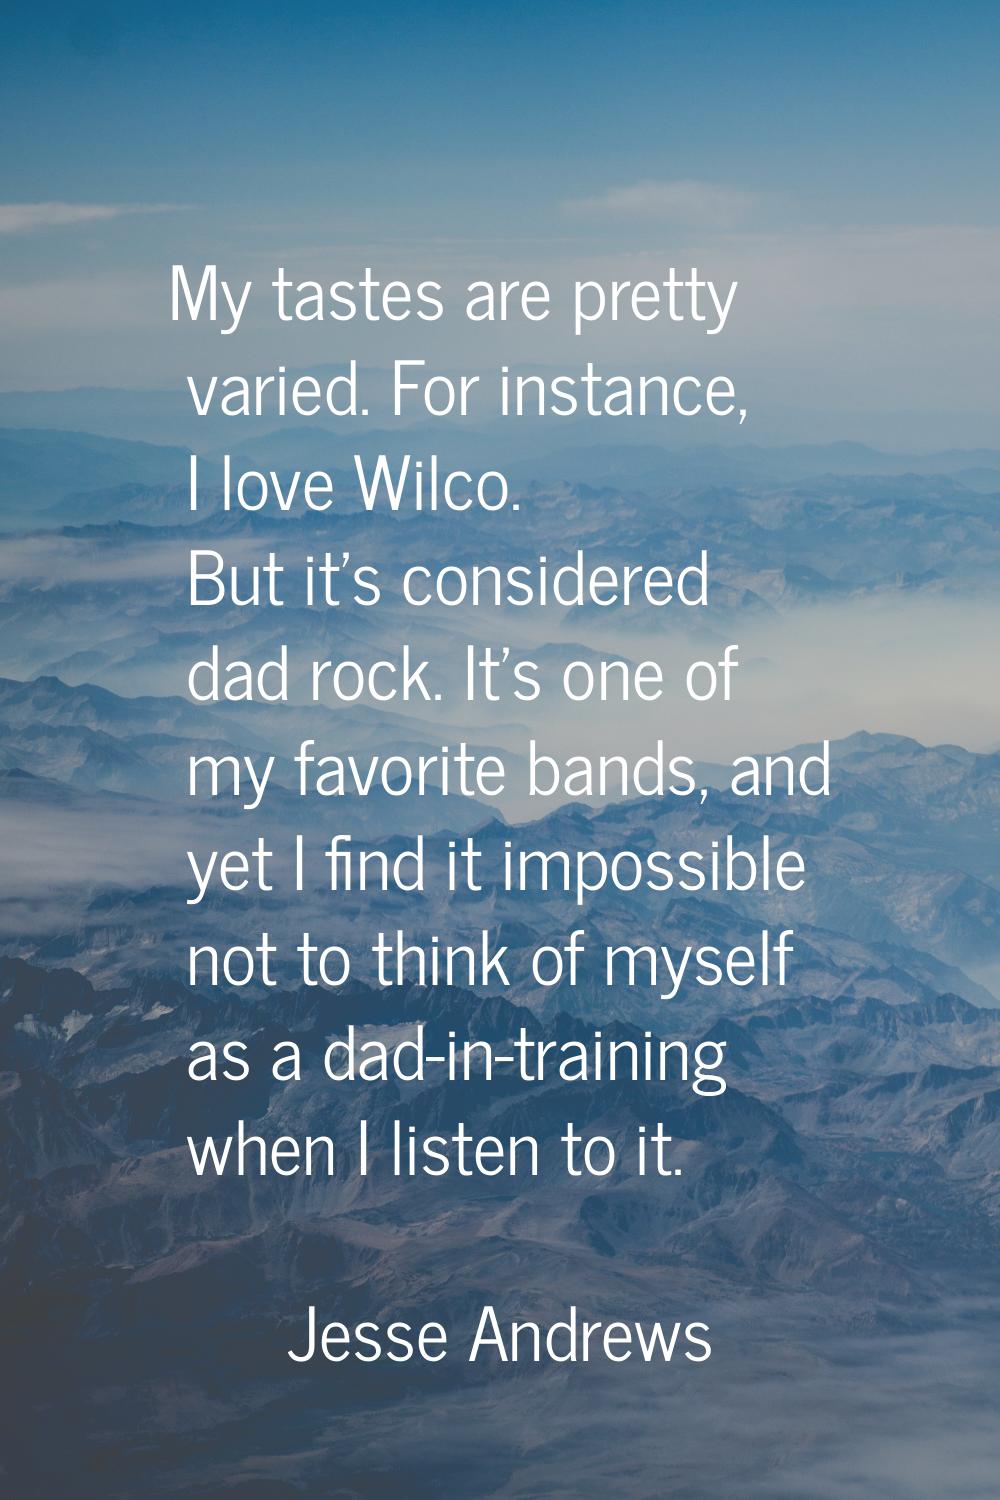 My tastes are pretty varied. For instance, I love Wilco. But it's considered dad rock. It's one of 